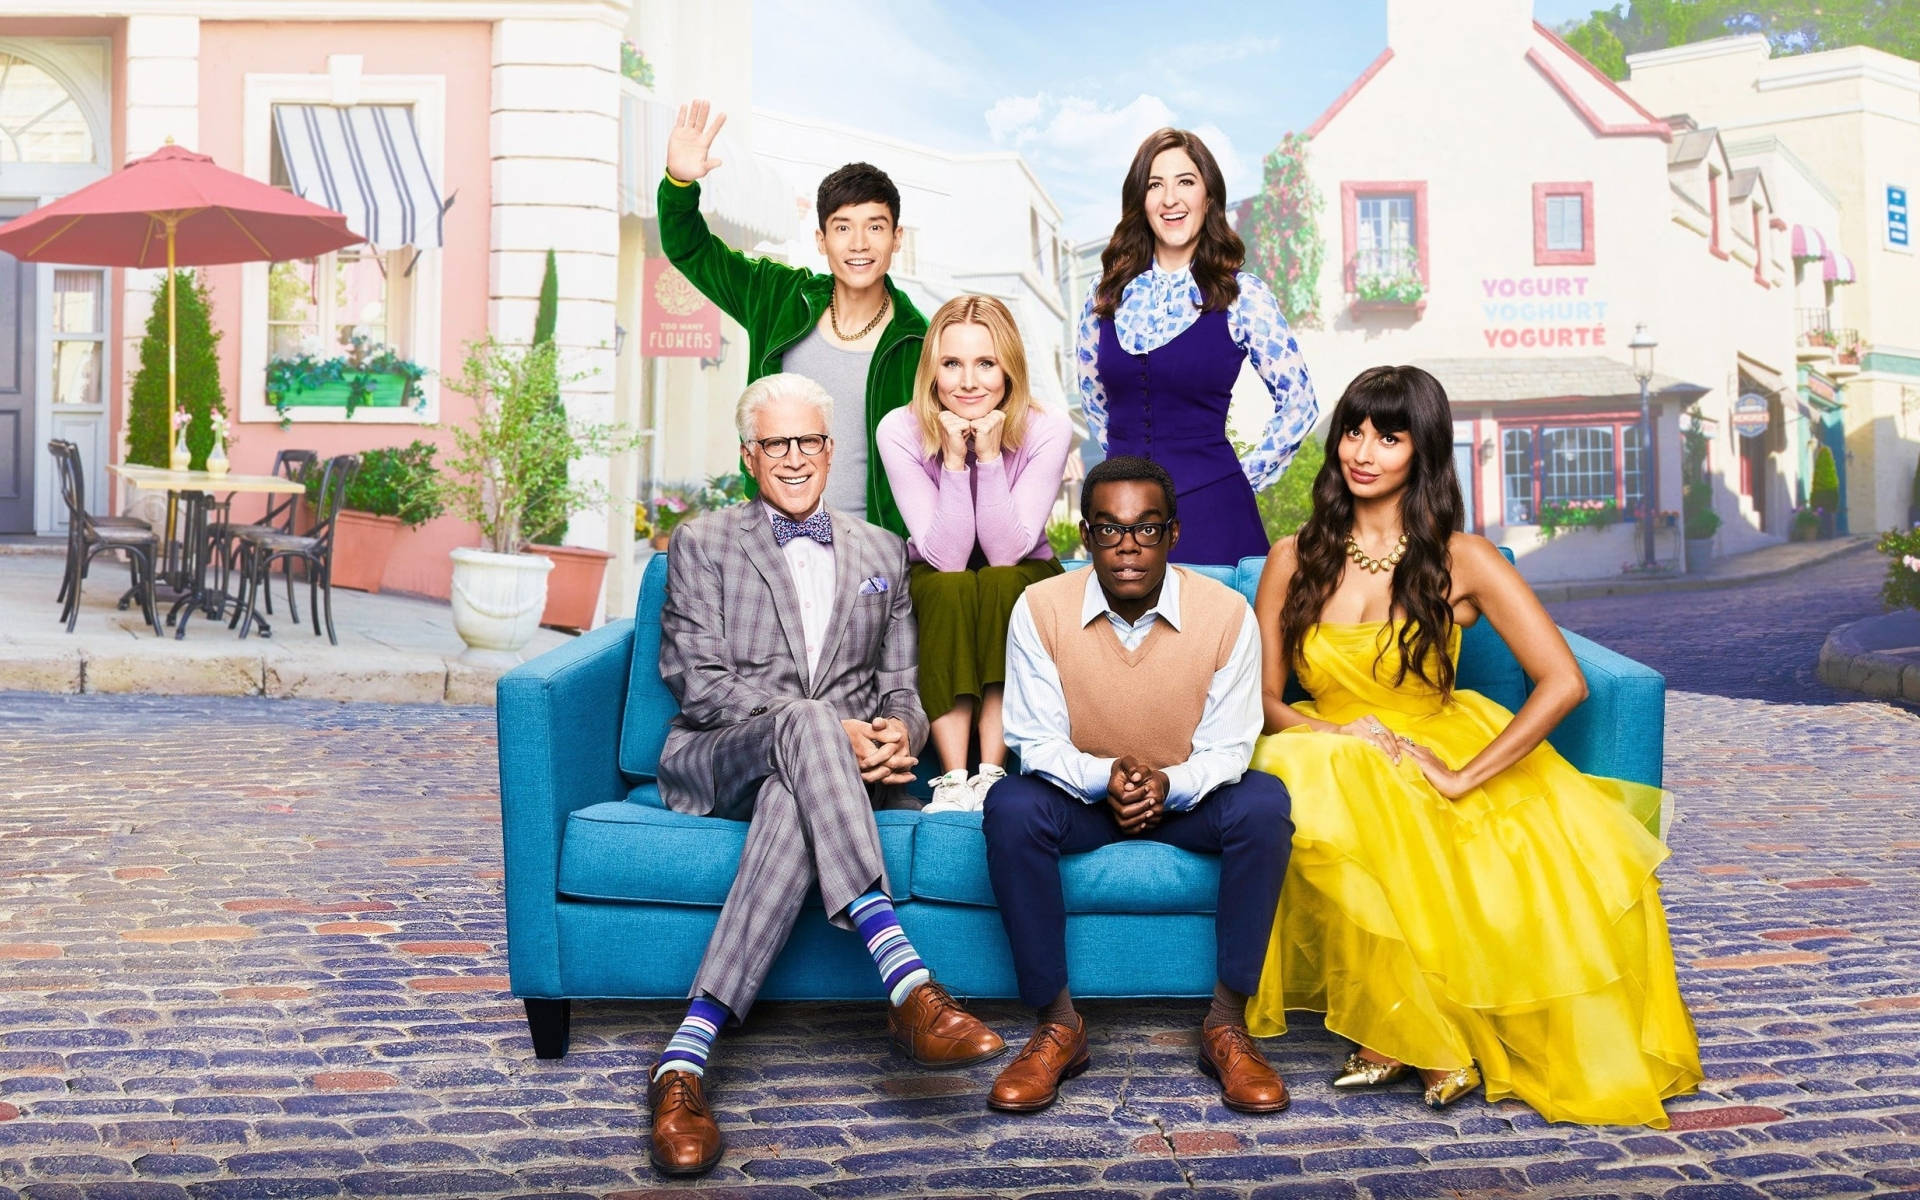 The Good Place Wallpaper